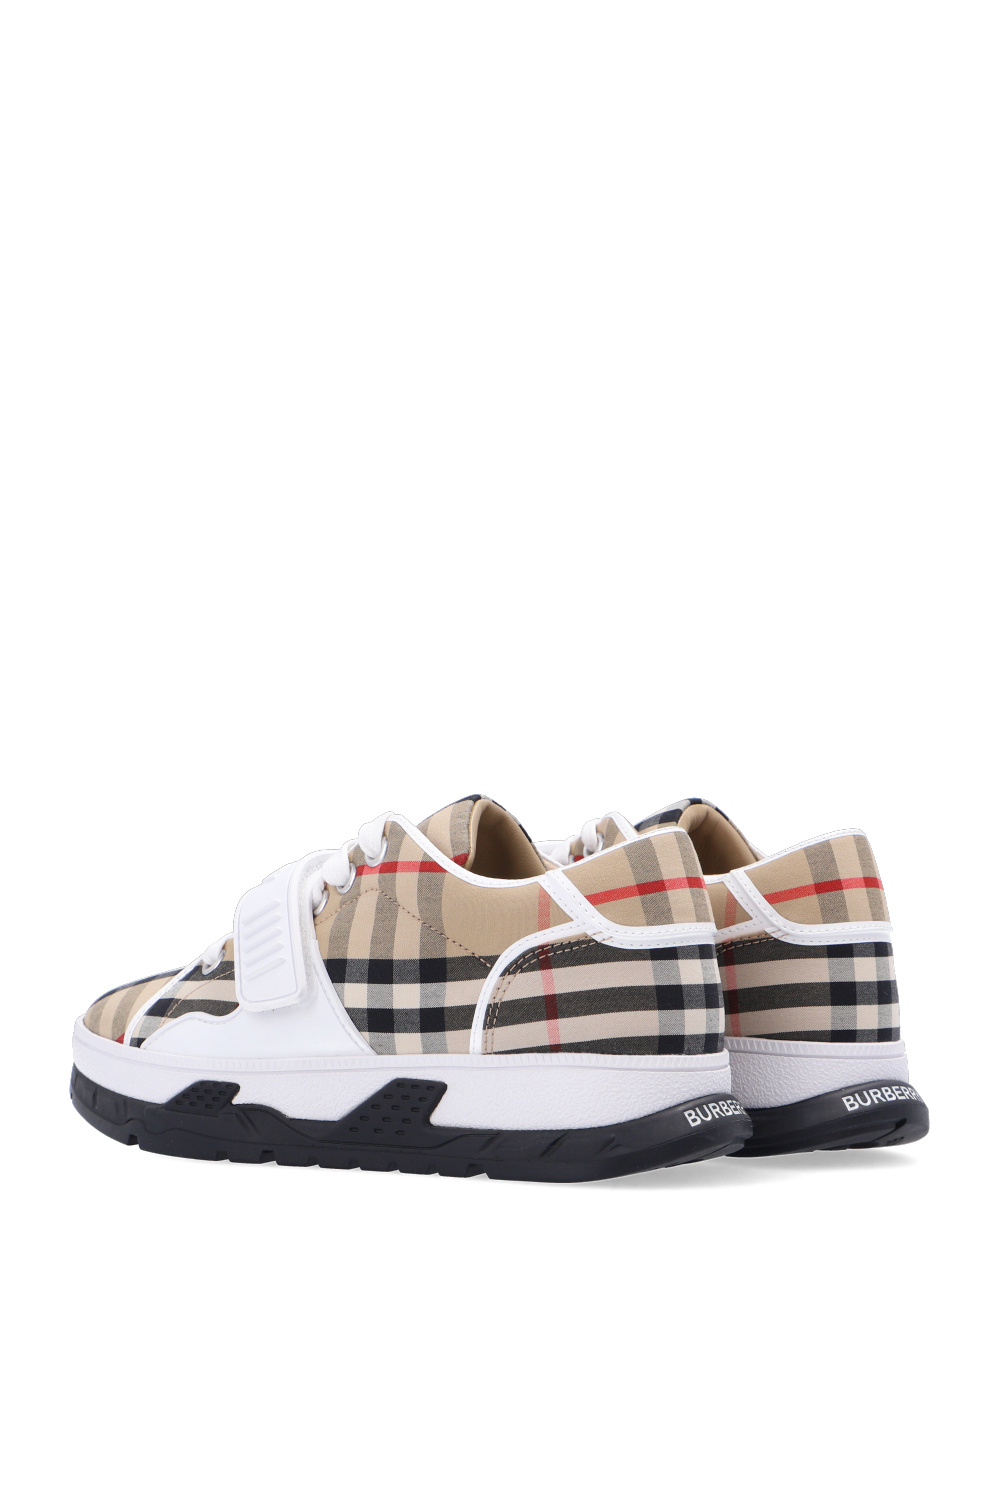 burberry for Kids Checked sneakers